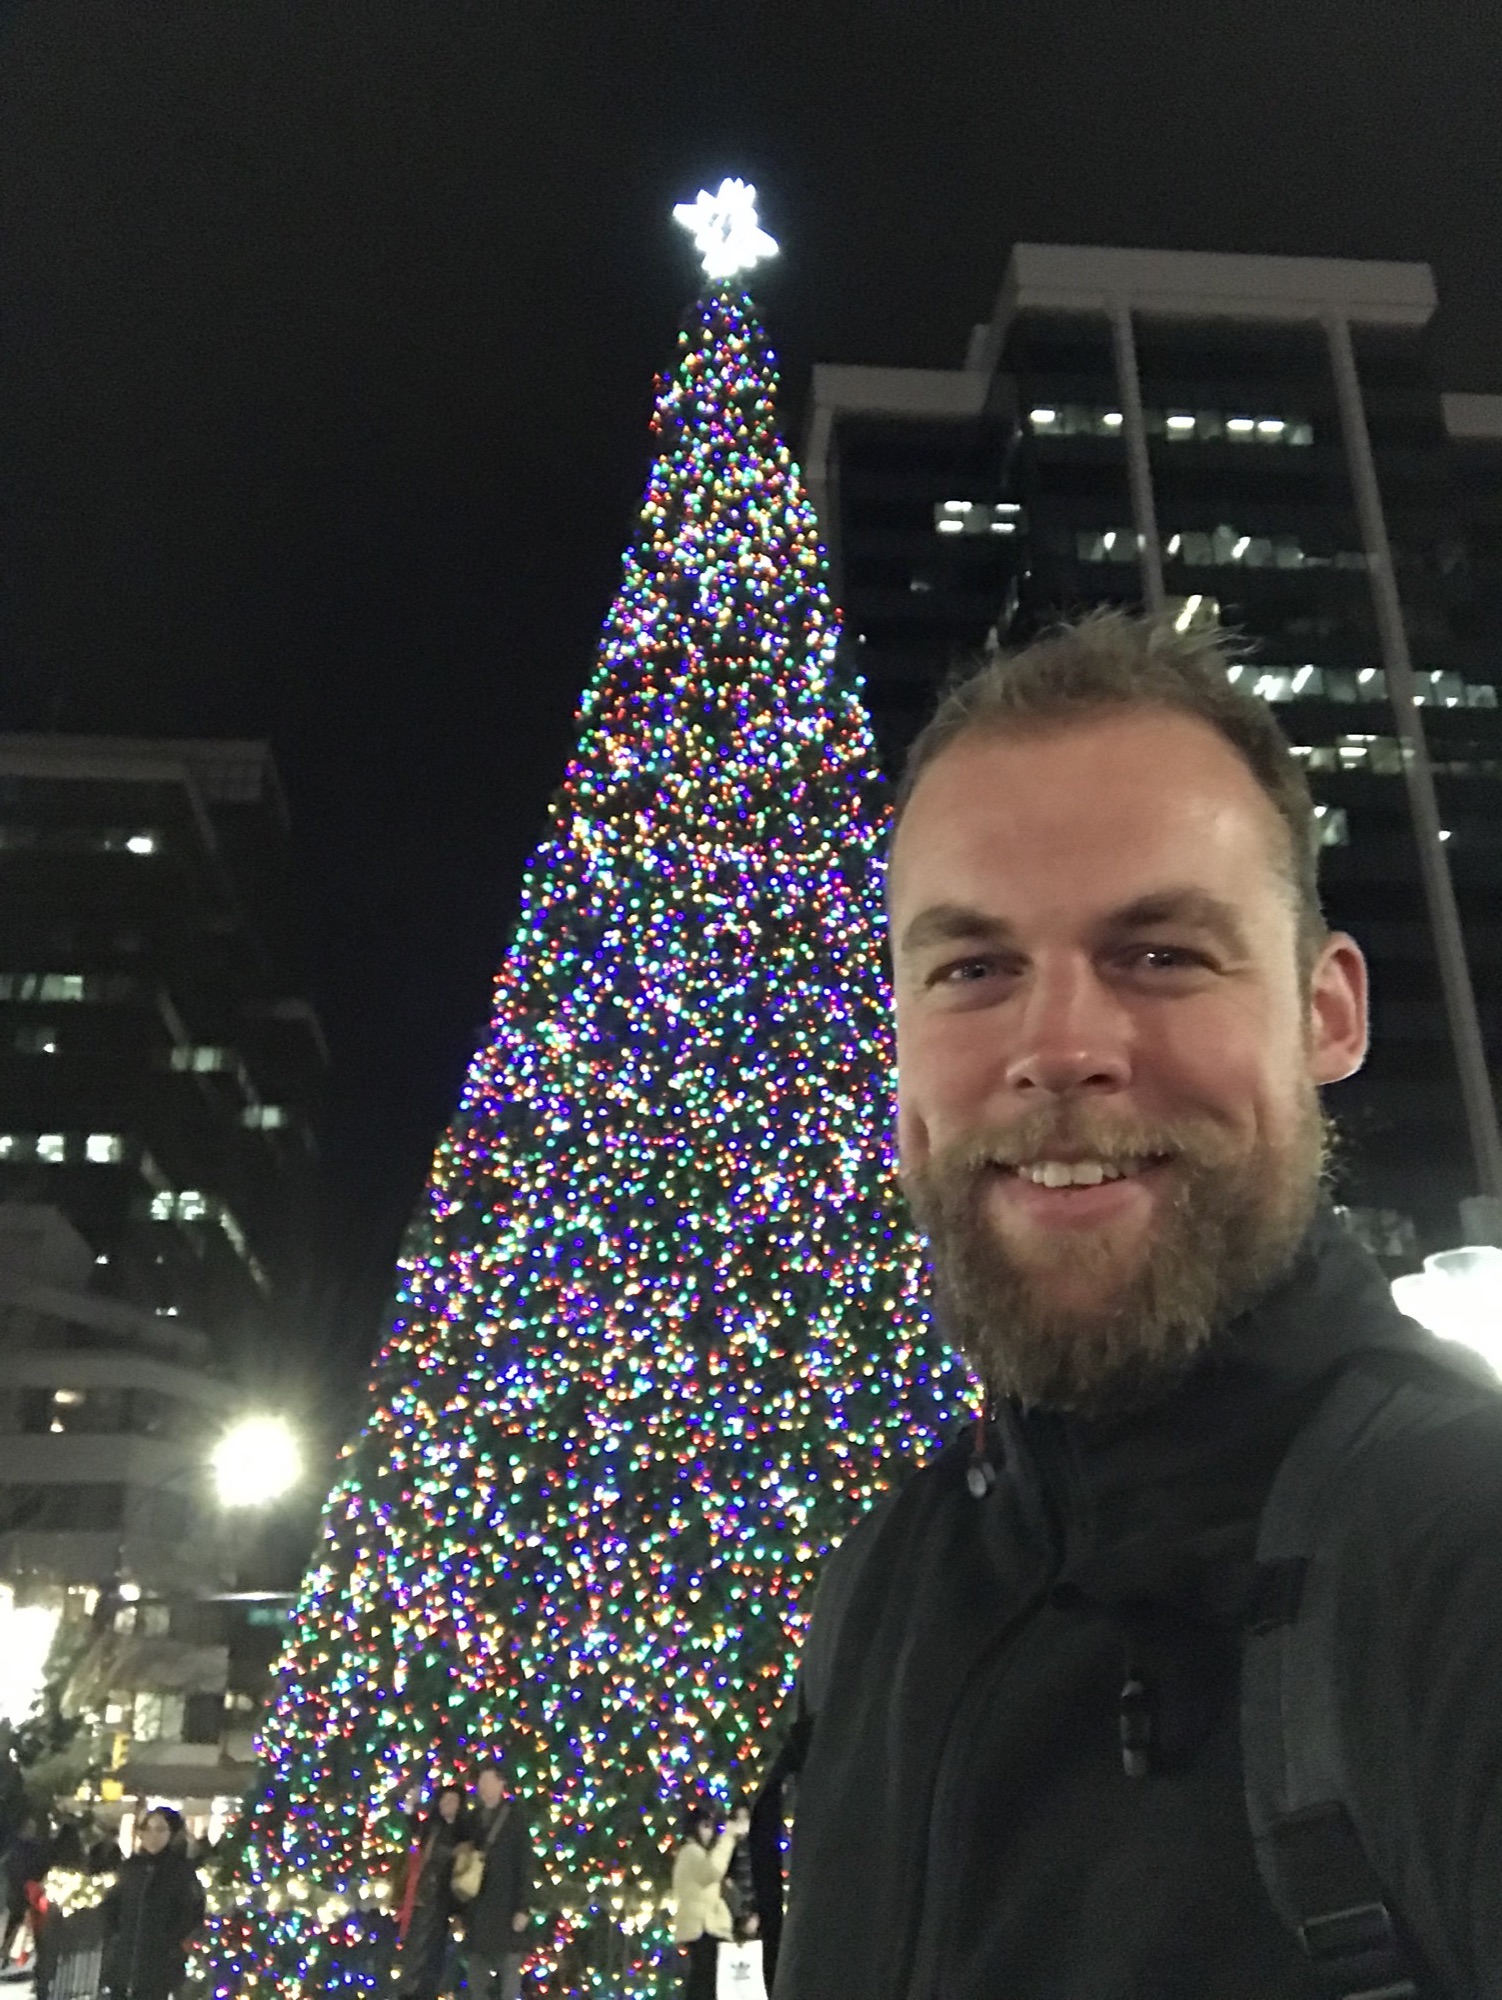 Big Christmas tree in Vancouver